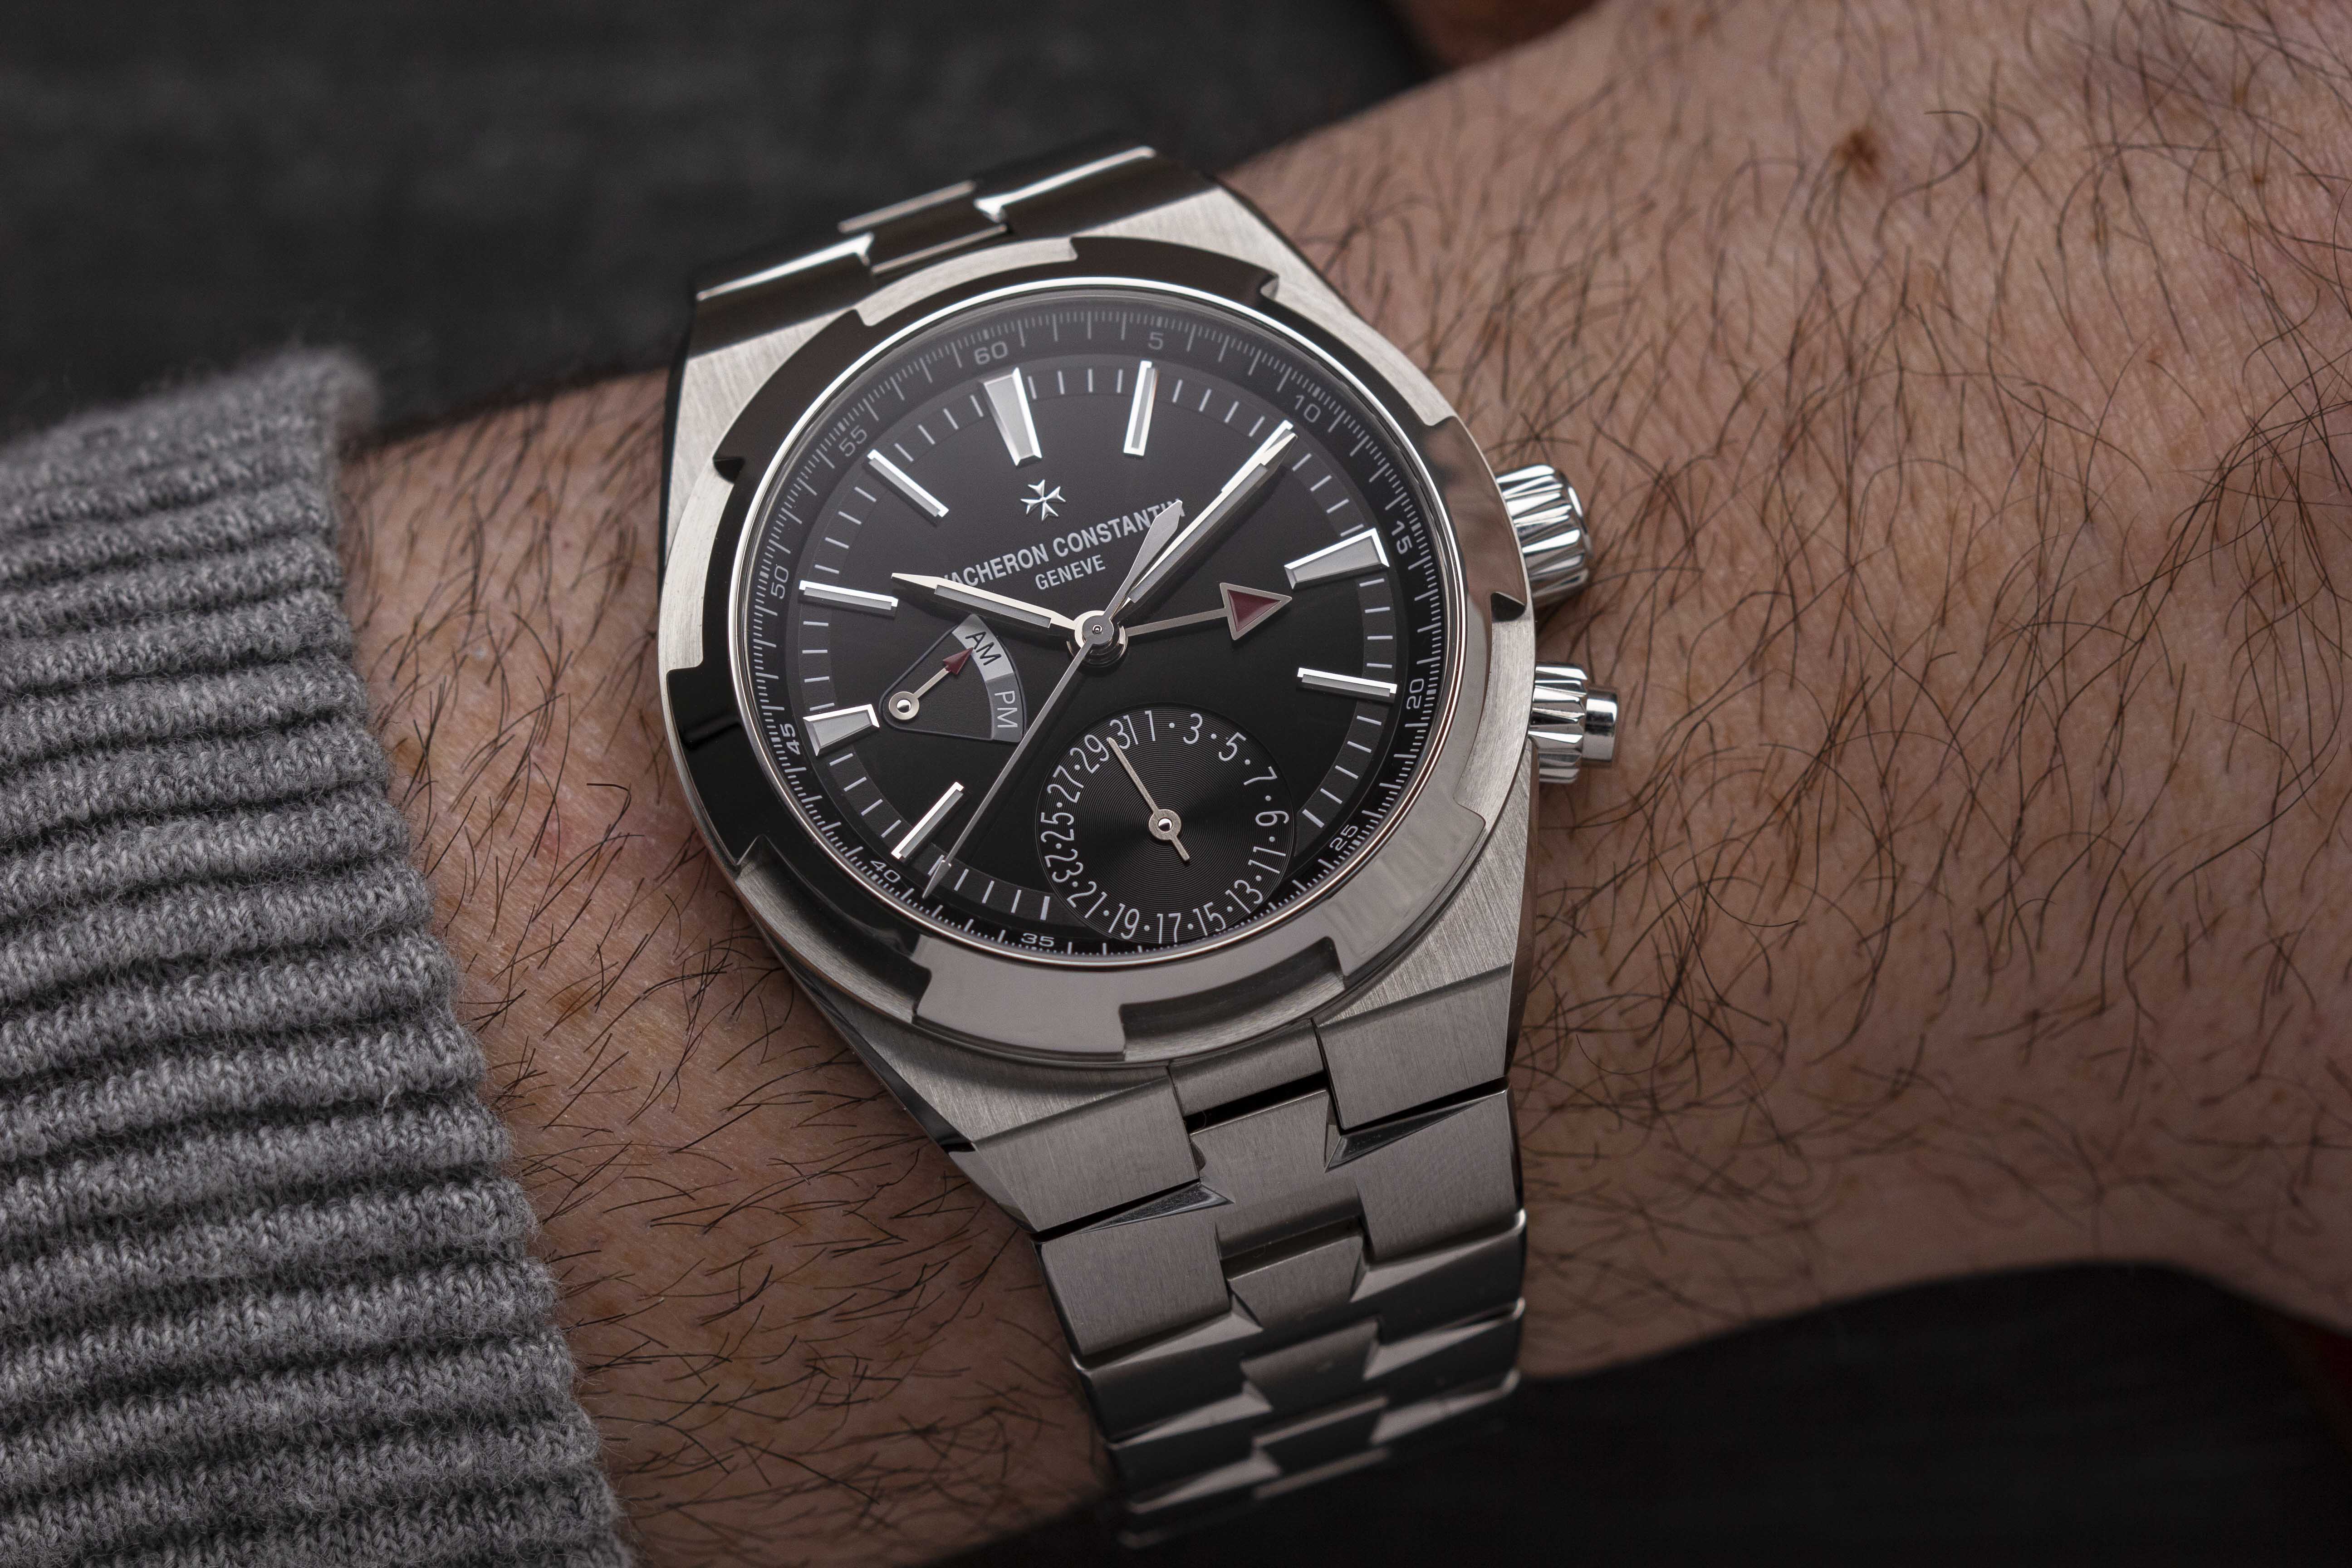 HANDS-ON: The Vacheron Constantin Overseas Dual Time is a seriously ...